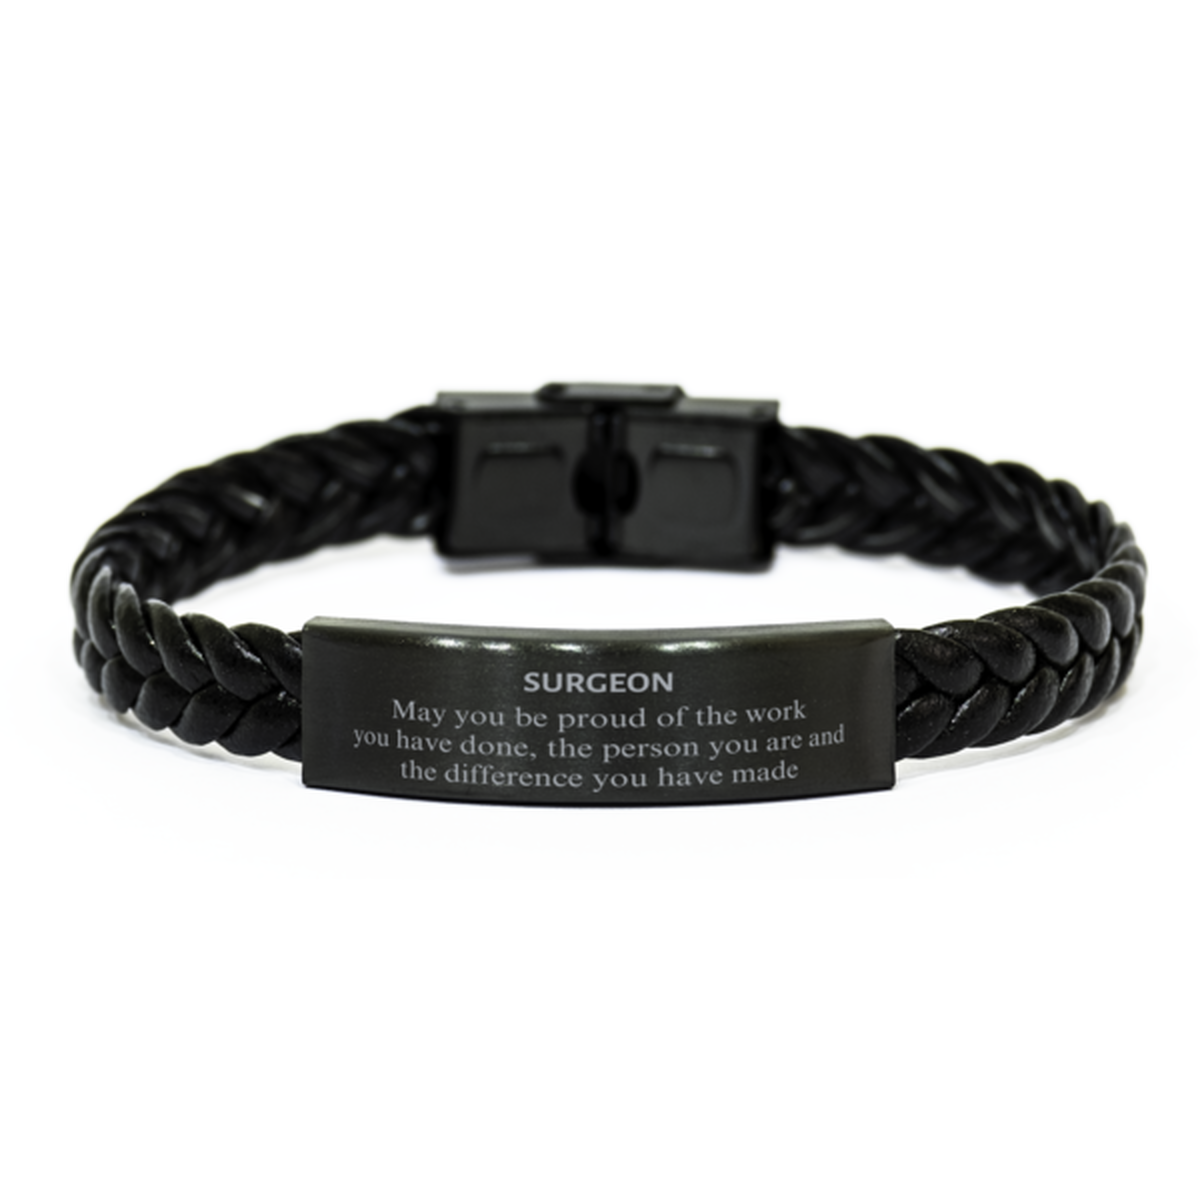 Surgeon May you be proud of the work you have done, Retirement Surgeon Braided Leather Bracelet for Colleague Appreciation Gifts Amazing for Surgeon